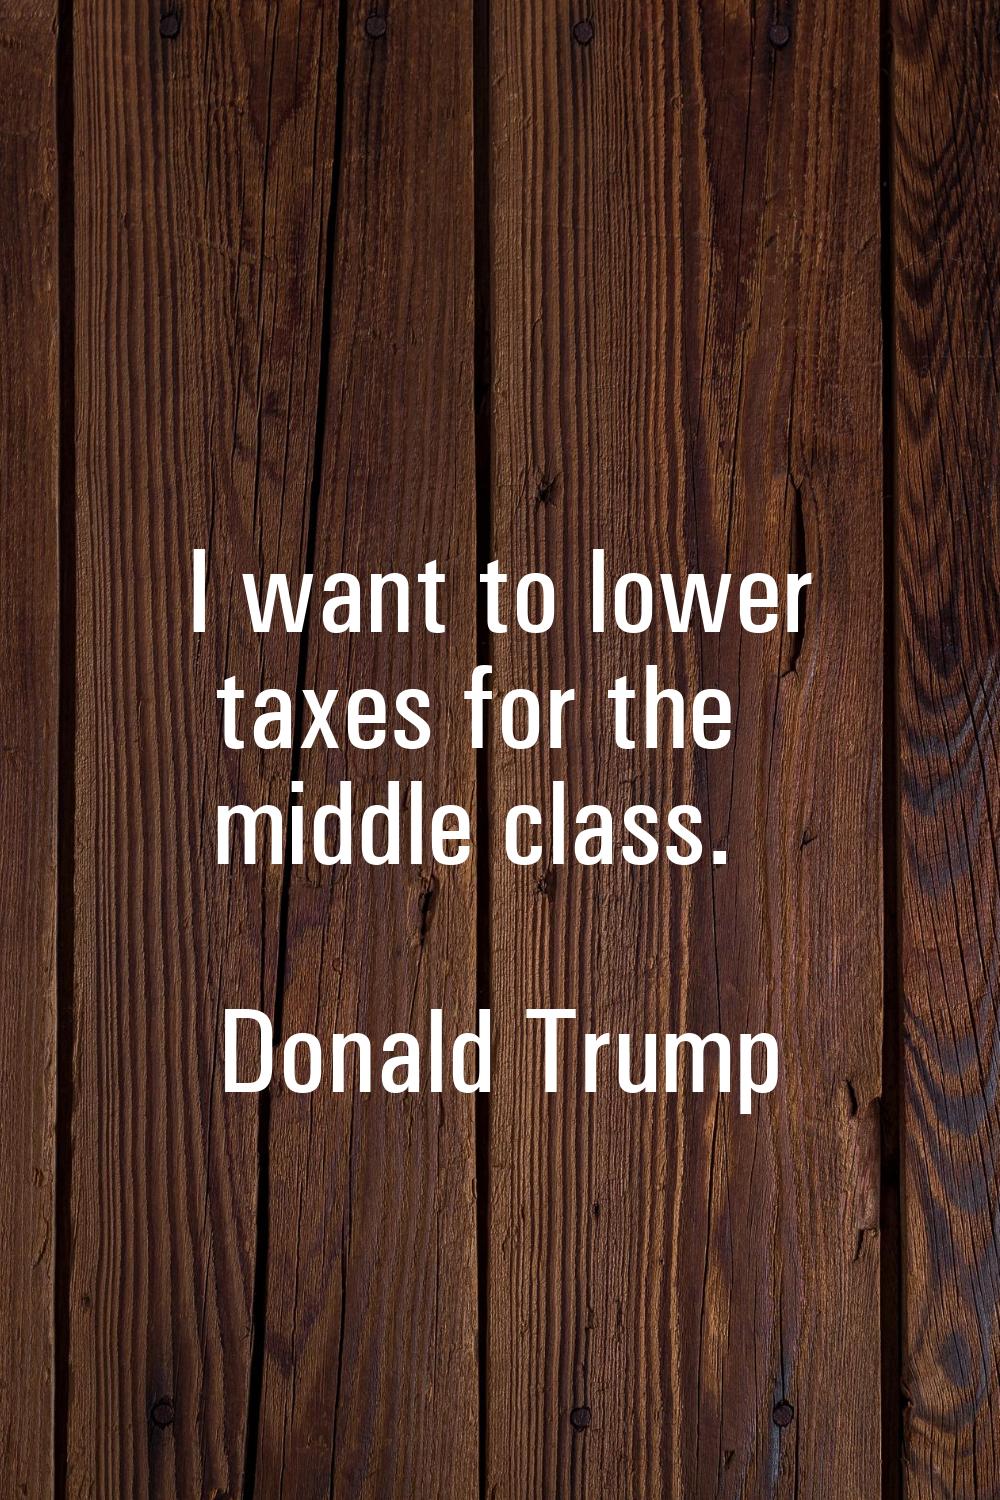 I want to lower taxes for the middle class.